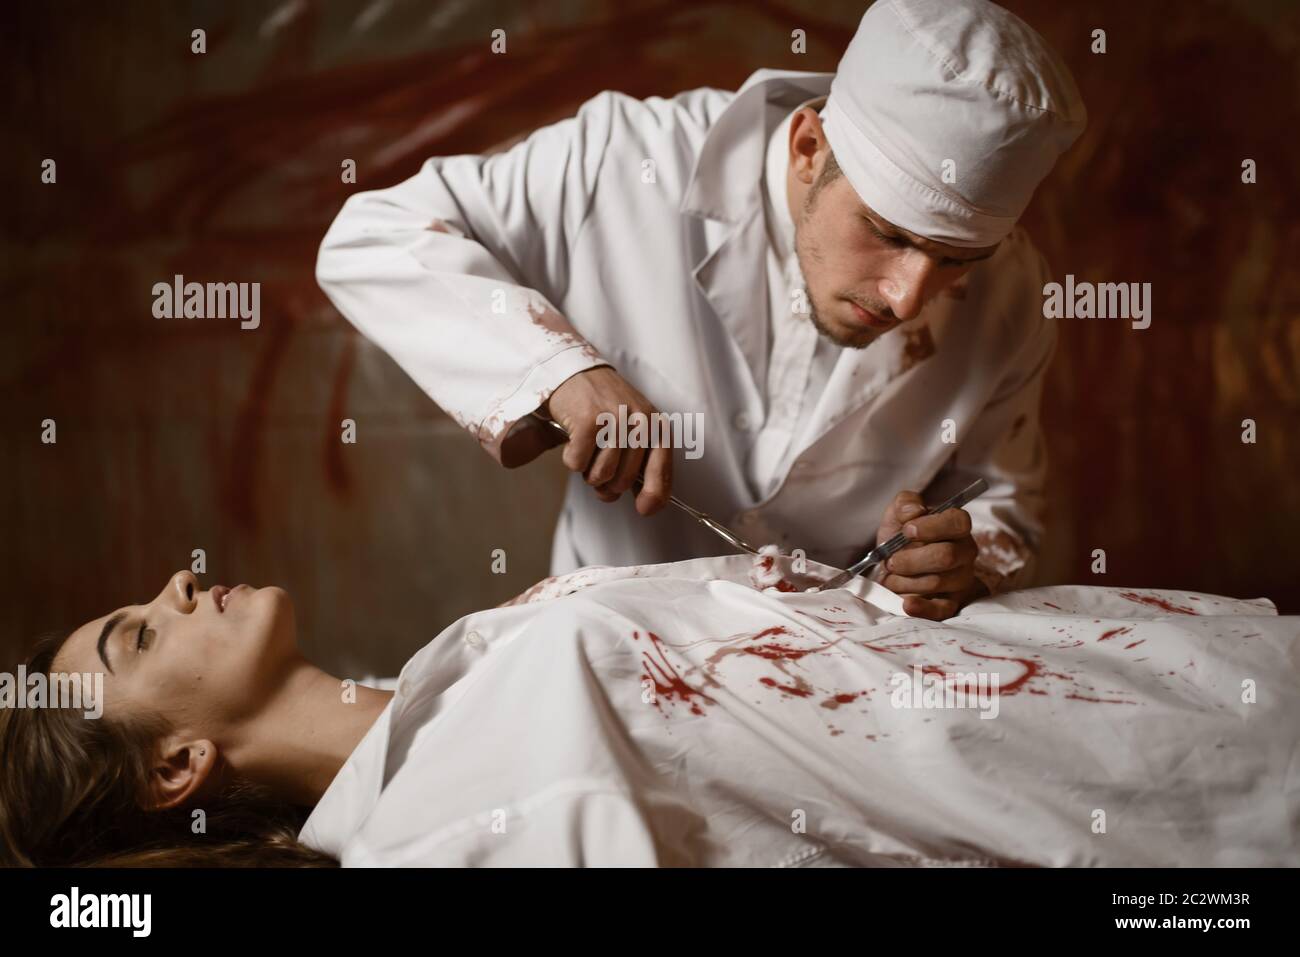 Crazy psychiatrist maniac makes an incision to female patient, experiment in mental hospital basement, bloody walls on background. Victim of mad docto Stock Photo